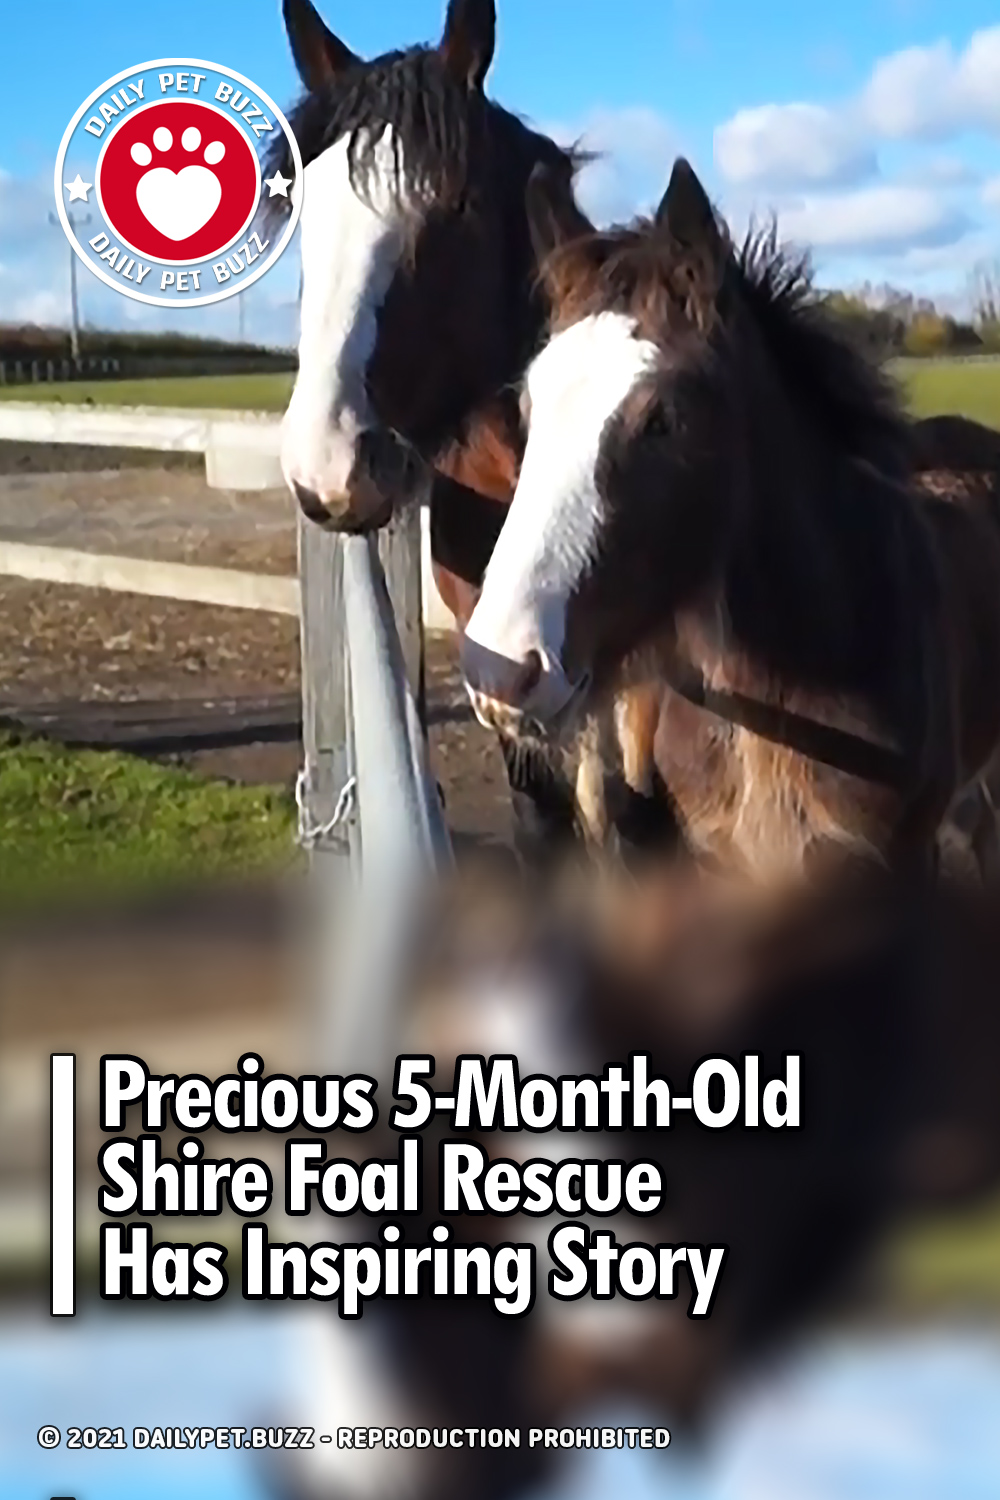 Precious 5-Month-Old Shire Foal Rescue Has Inspiring Story